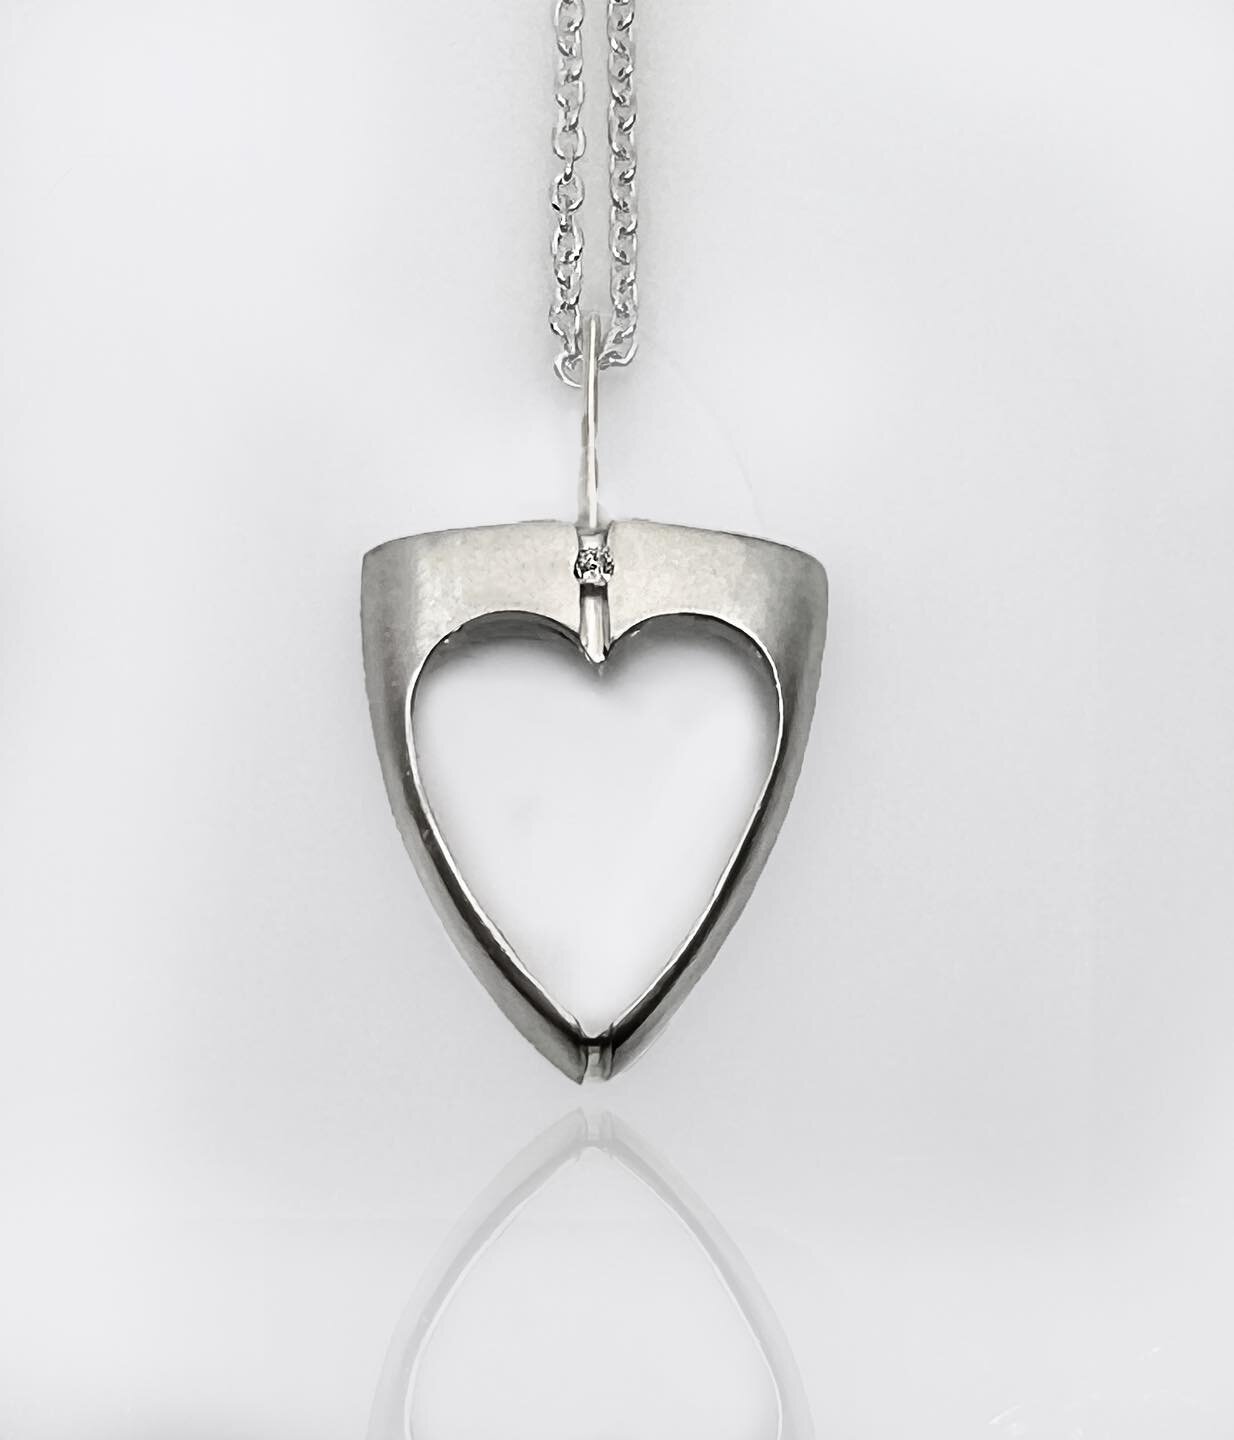 Are you feeling love?  Happy February&hellip;. 
Silver with diamond heart pendant on chain.  Also available in gold. 

#feellove #gifts #GiftsOfLove #silver #heart #silverheartnecklace #silverheartjewelry #valentinesdaygifts #contemporaryjewelrydesig